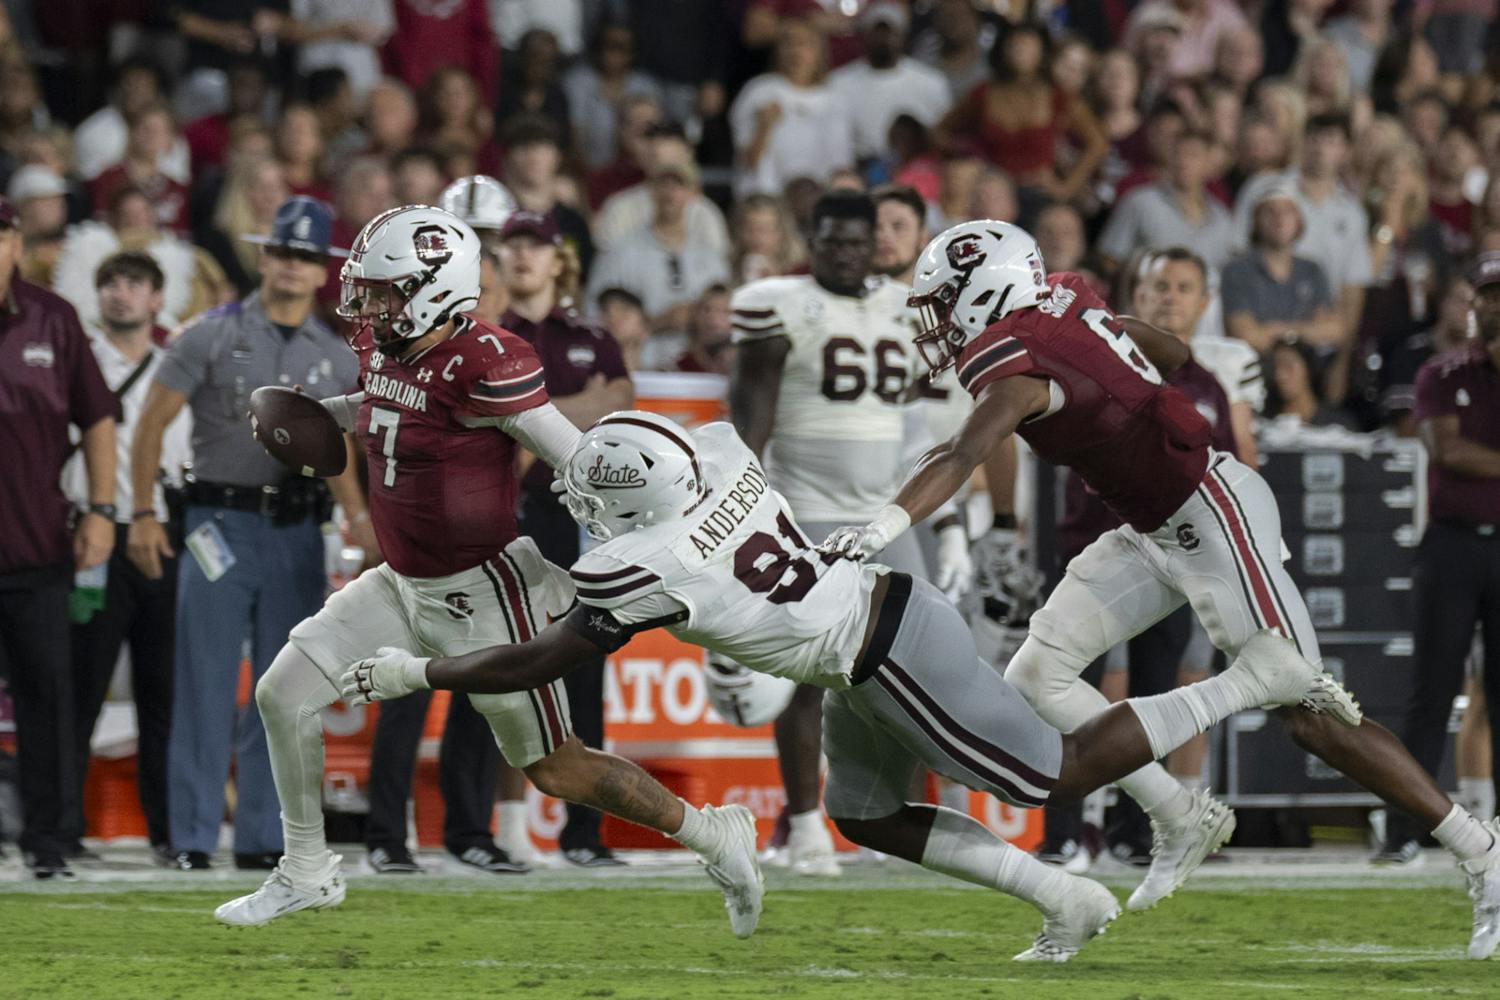 South Carolina defeated Mississippi State 37-30 Saturday in a back and forth game at Williams-Brice Stadium. This victory puts the Gamecocks at 2-2 for the 鶹С򽴫ý.